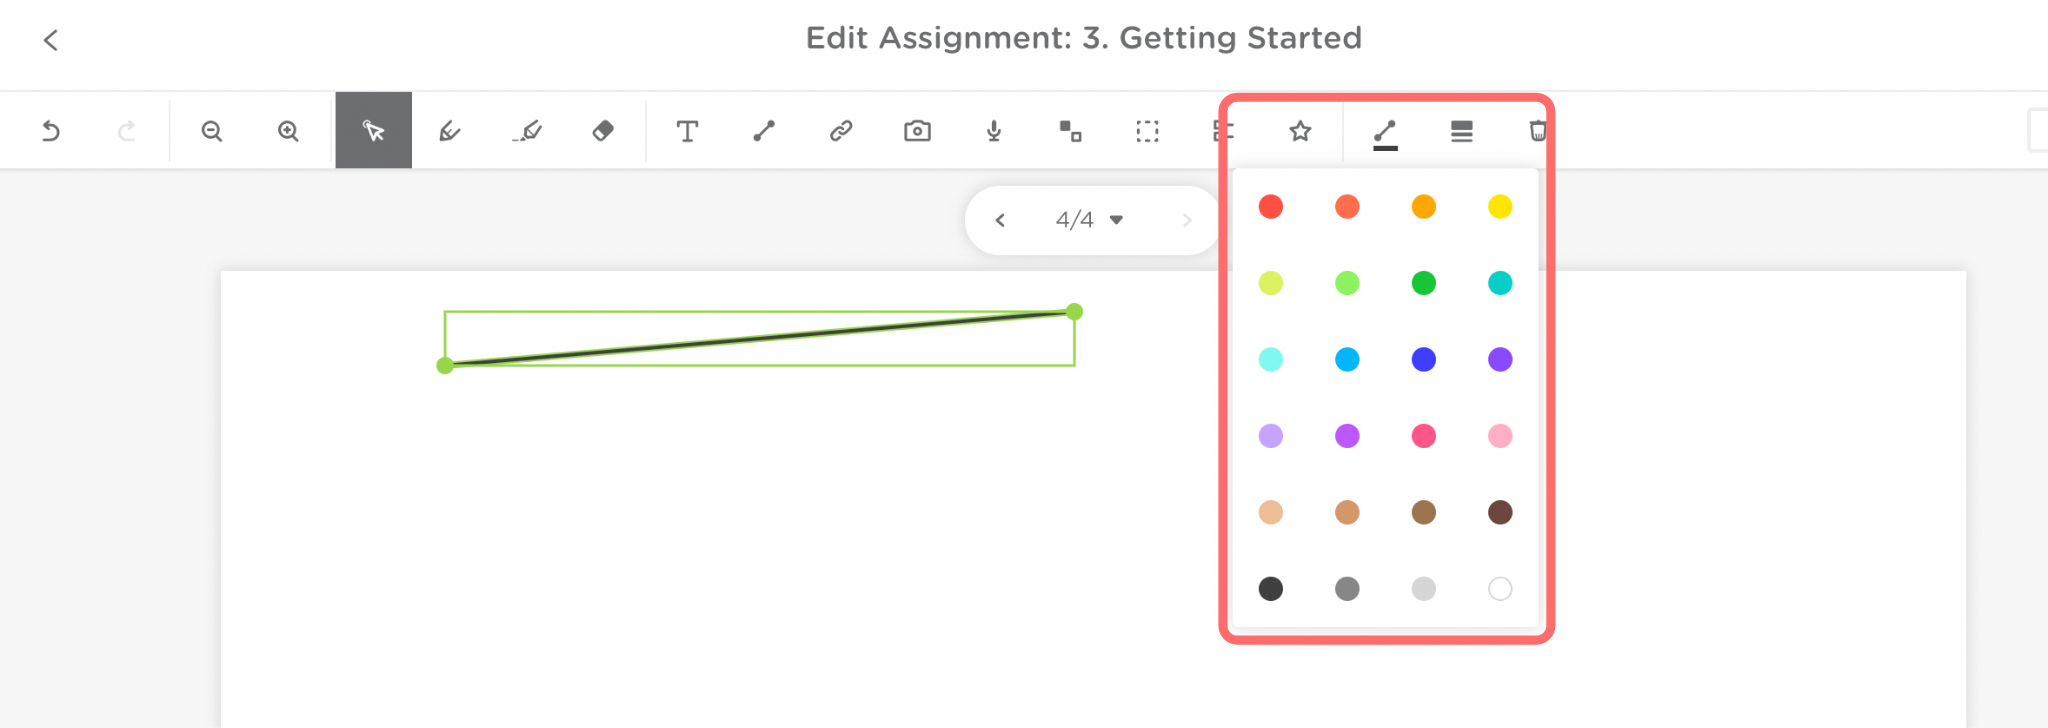 An assignment slide. A line is already on the slide. The Line color icon displays the different colors the line can be. The icon and colors are outlined in red.